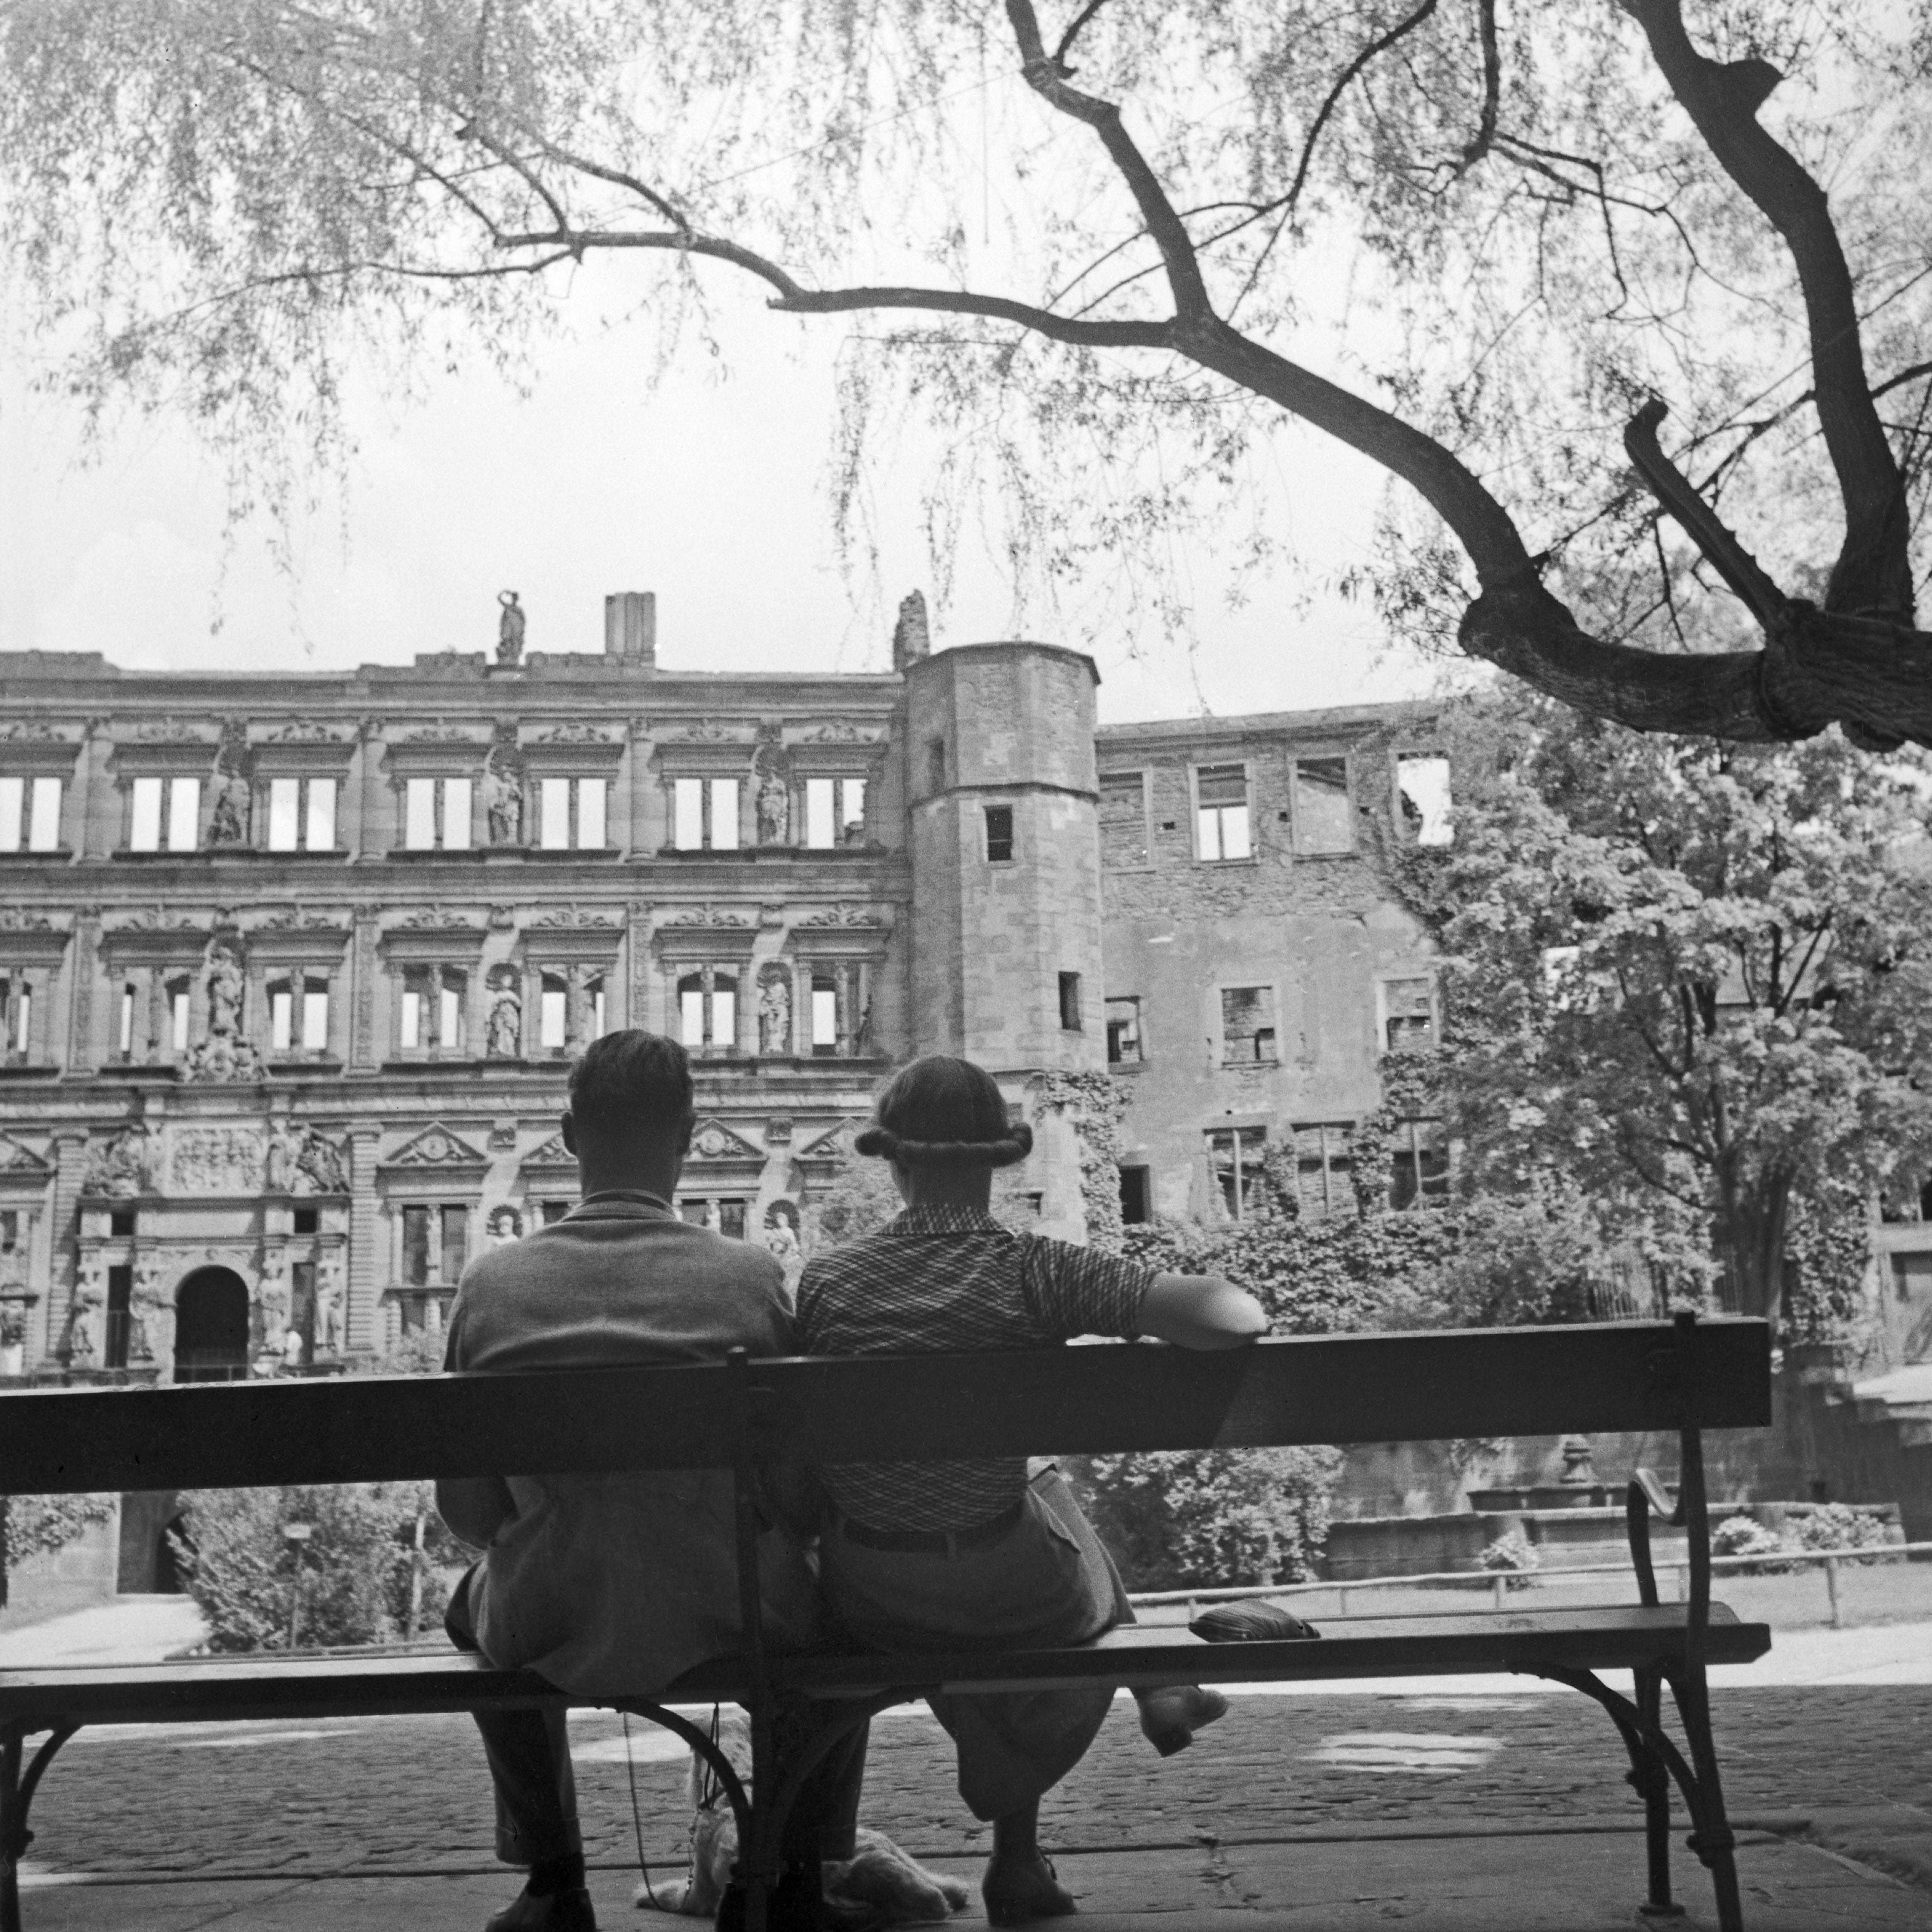 Karl Heinrich Lämmel Black and White Photograph - Couple on bench view to Heidelberg castle, Germany 1936, Printed Later 